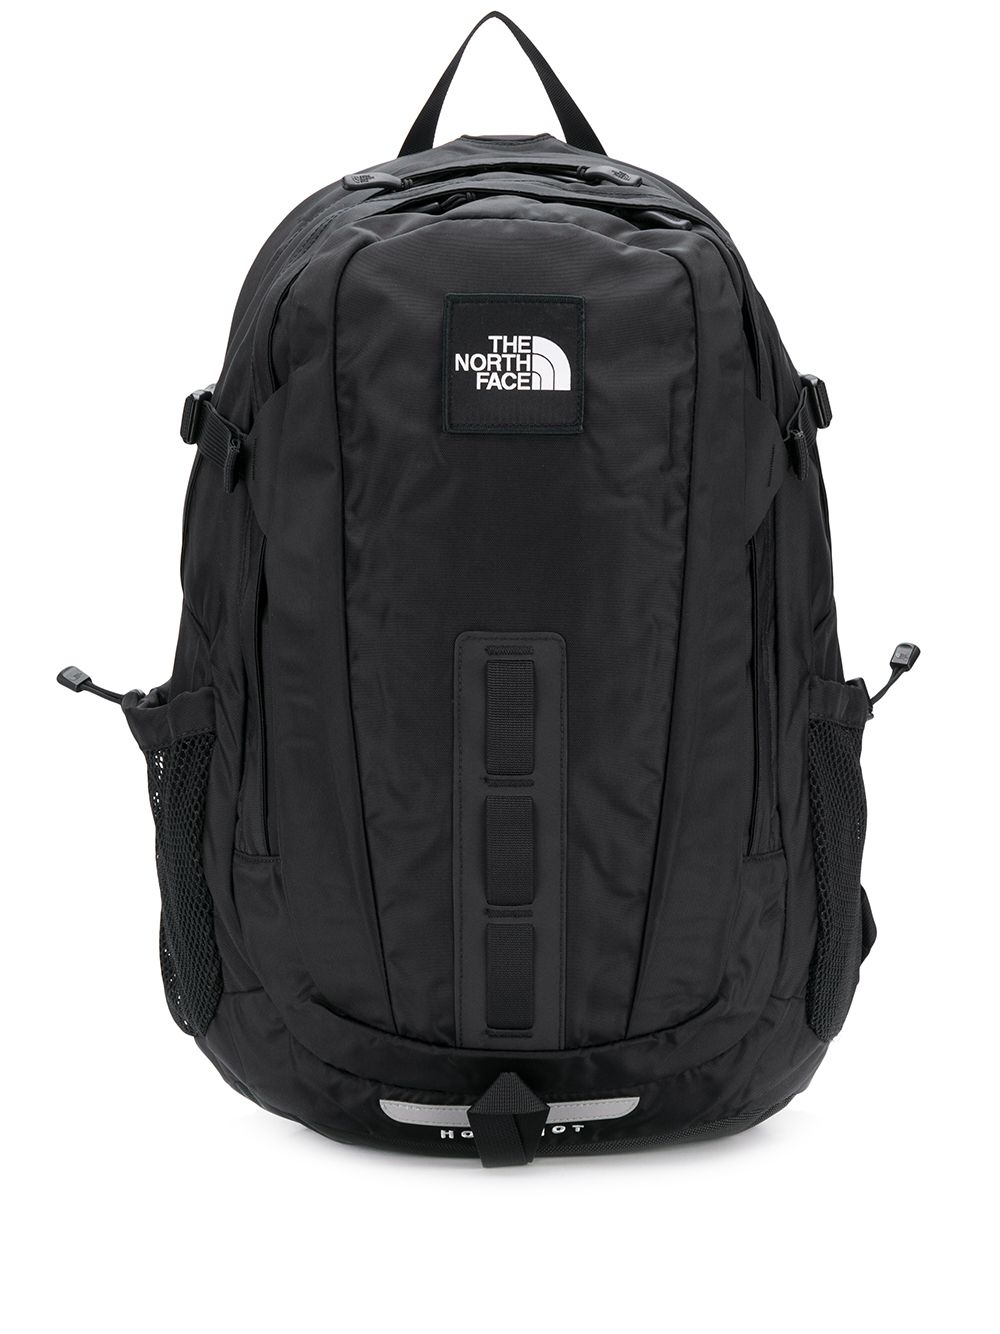 The North Face Hot Shot Backpack Farfetch